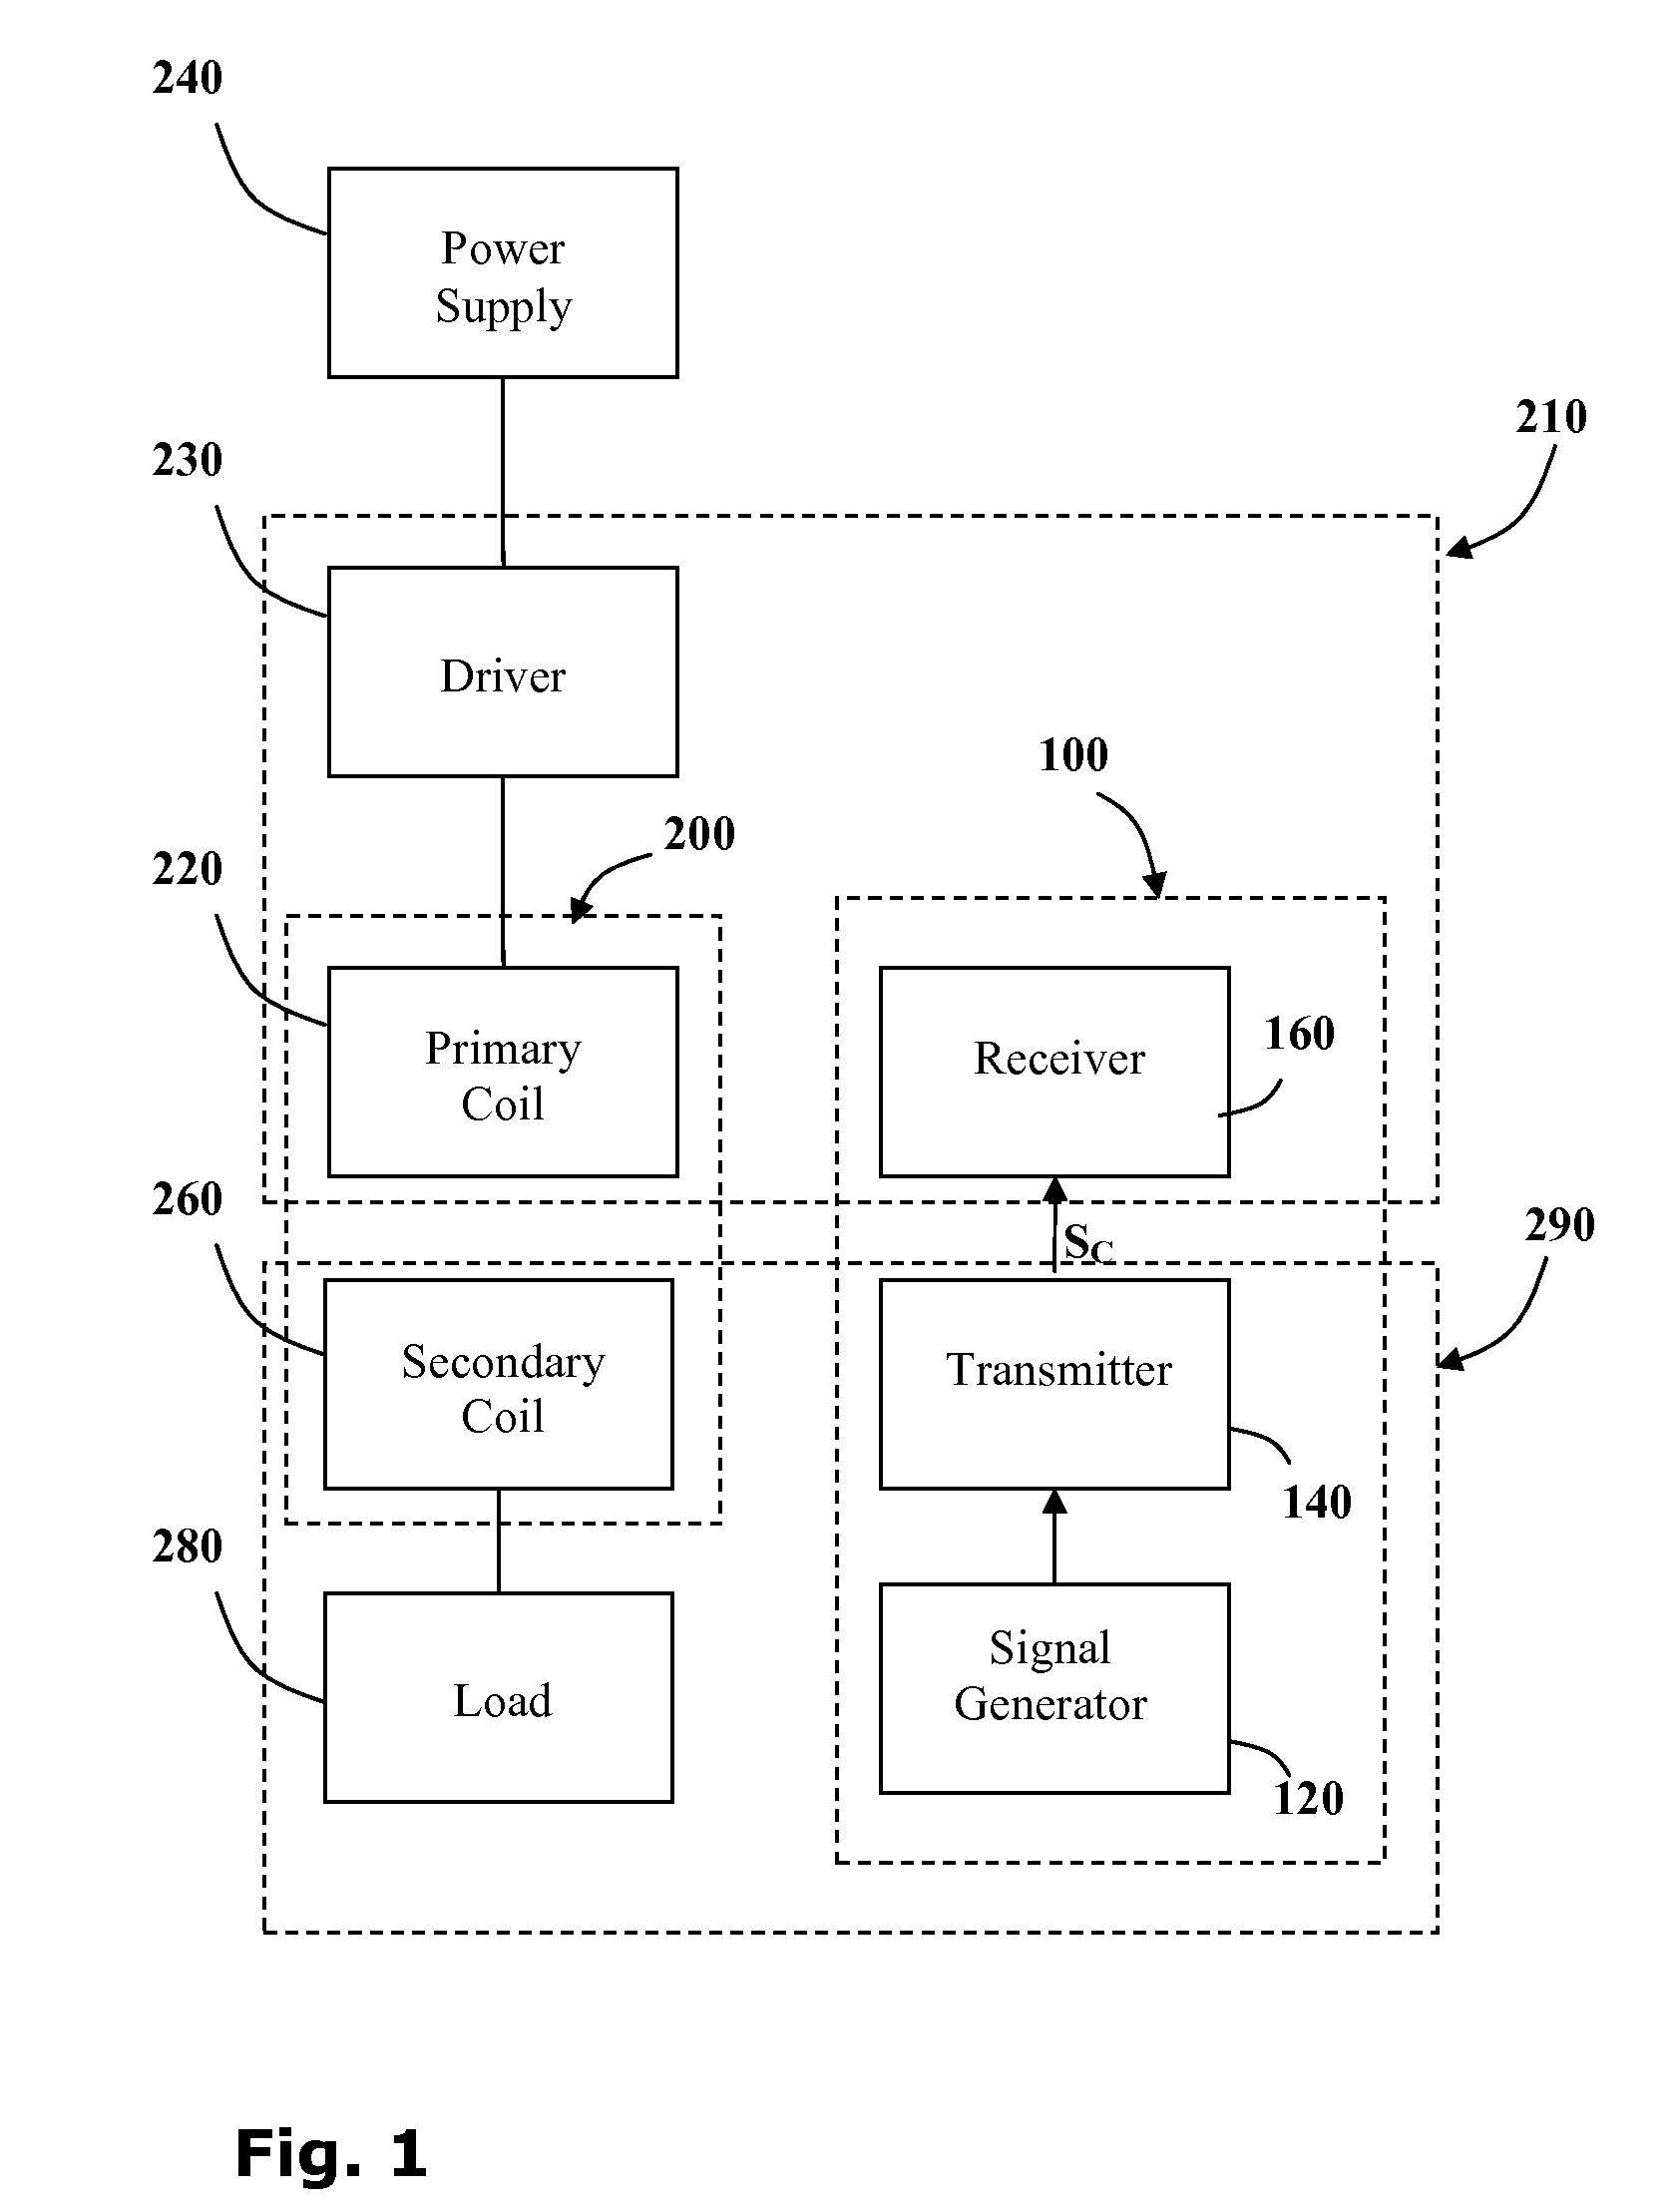 System and method for controlling power transfer across an inductive power coupling